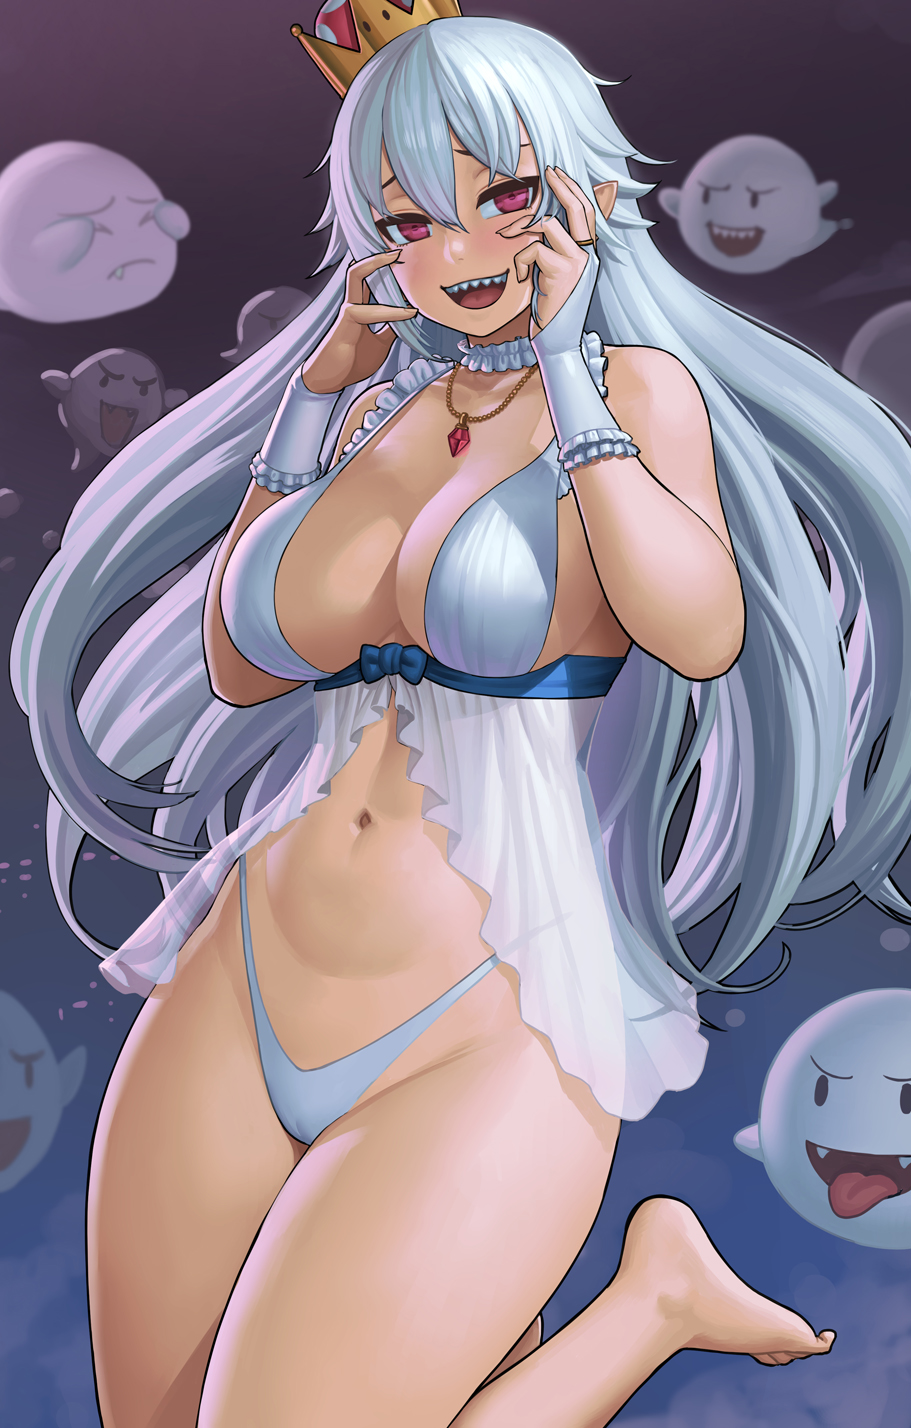 Anime 911x1428 Mario Bros. New Super Mario Bros. 2 anime girls long hair big boobs 2D thighs the gap gray hair pointy ears ghost open mouth looking at viewer portrait display blushing Luigi's Mansion Boo (Mario) white lingerie white panties cleavage belly button purple eyes barefoot crown Boosette Lasterk fan art no bra